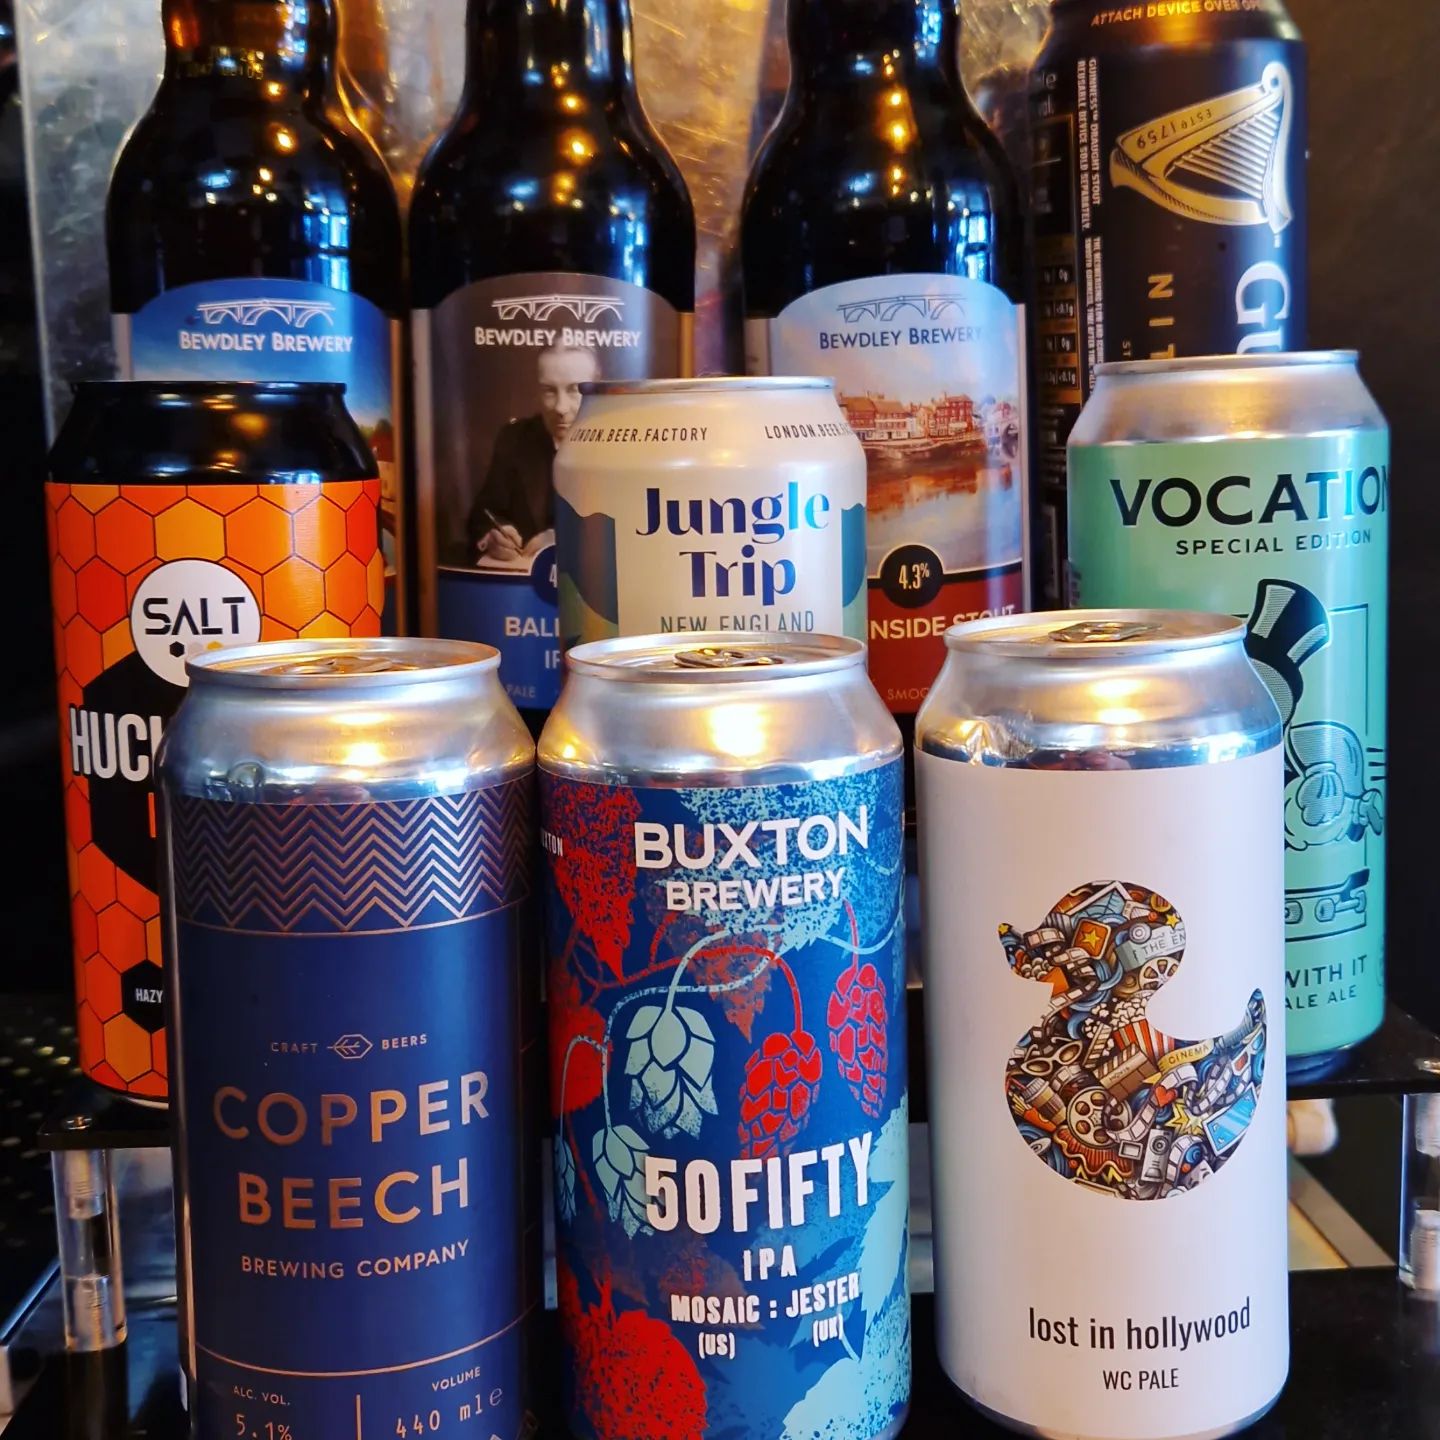 various local craft beers and ales from worcestershire